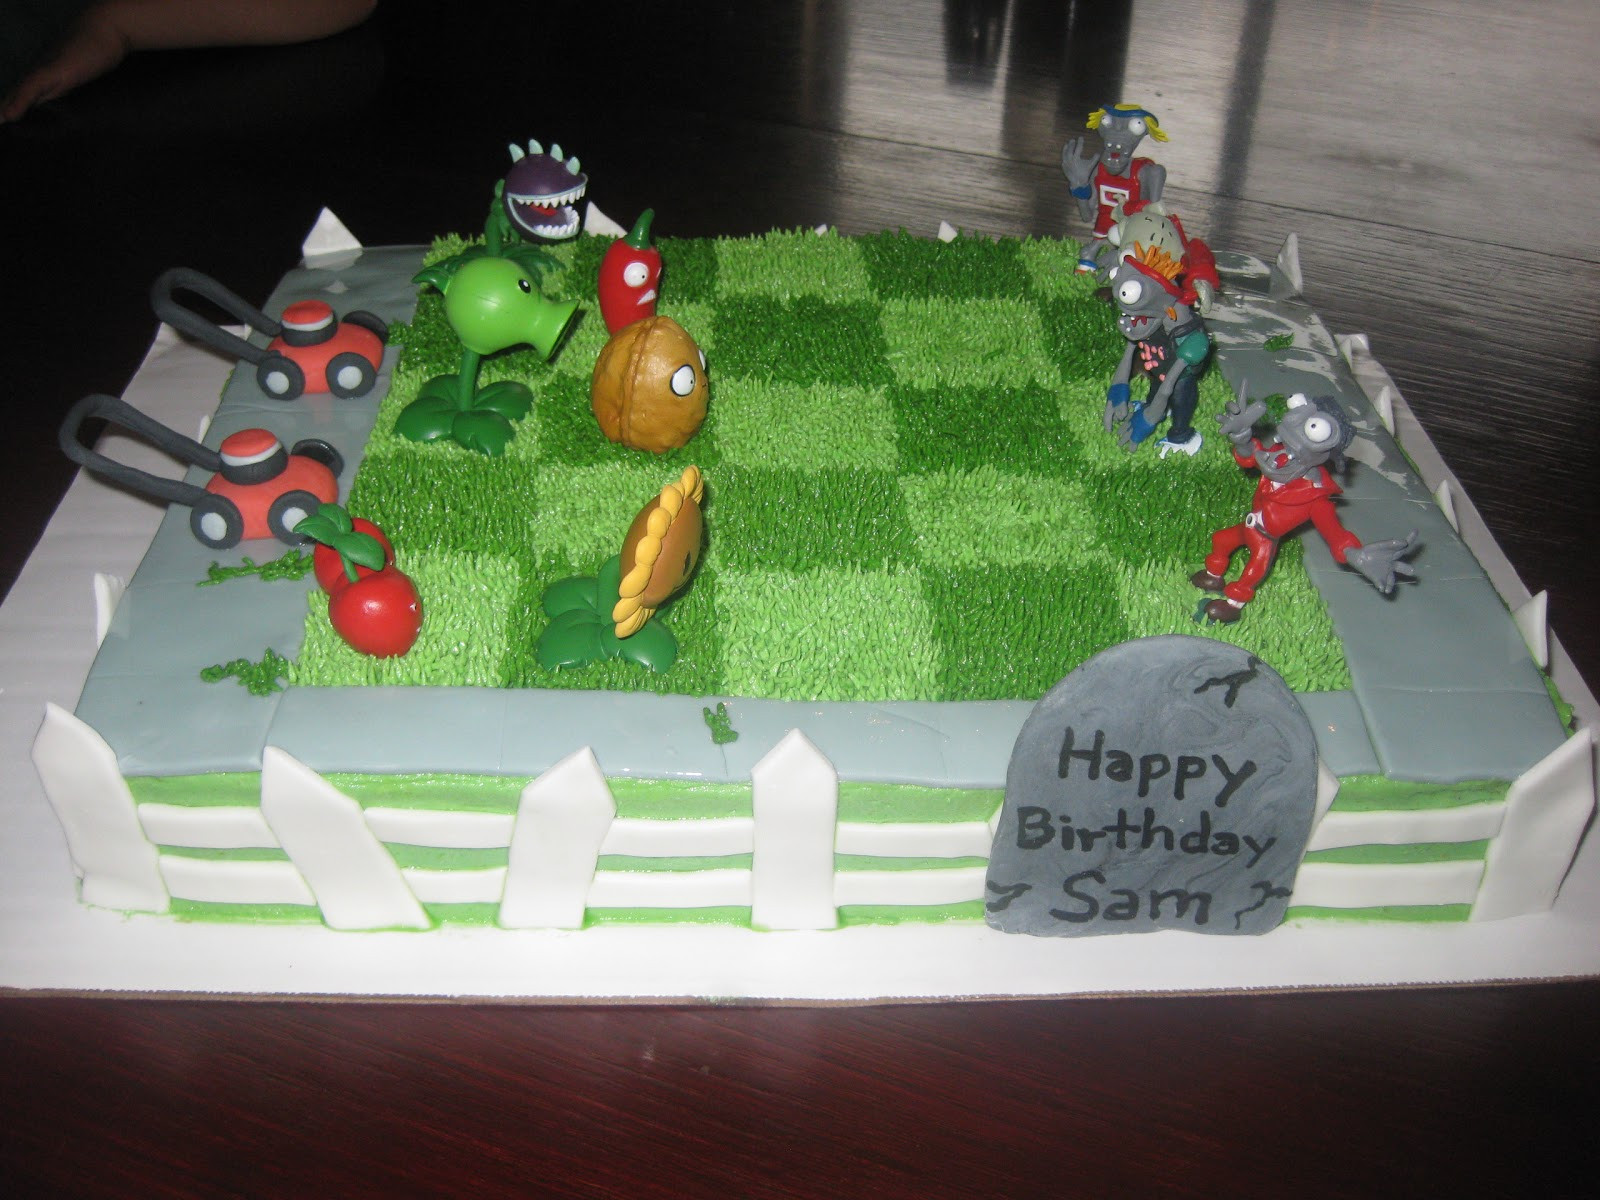 Plants Vs Zombies Birthday Cake
 Cakes by Janelle Plants vs Zombies cake